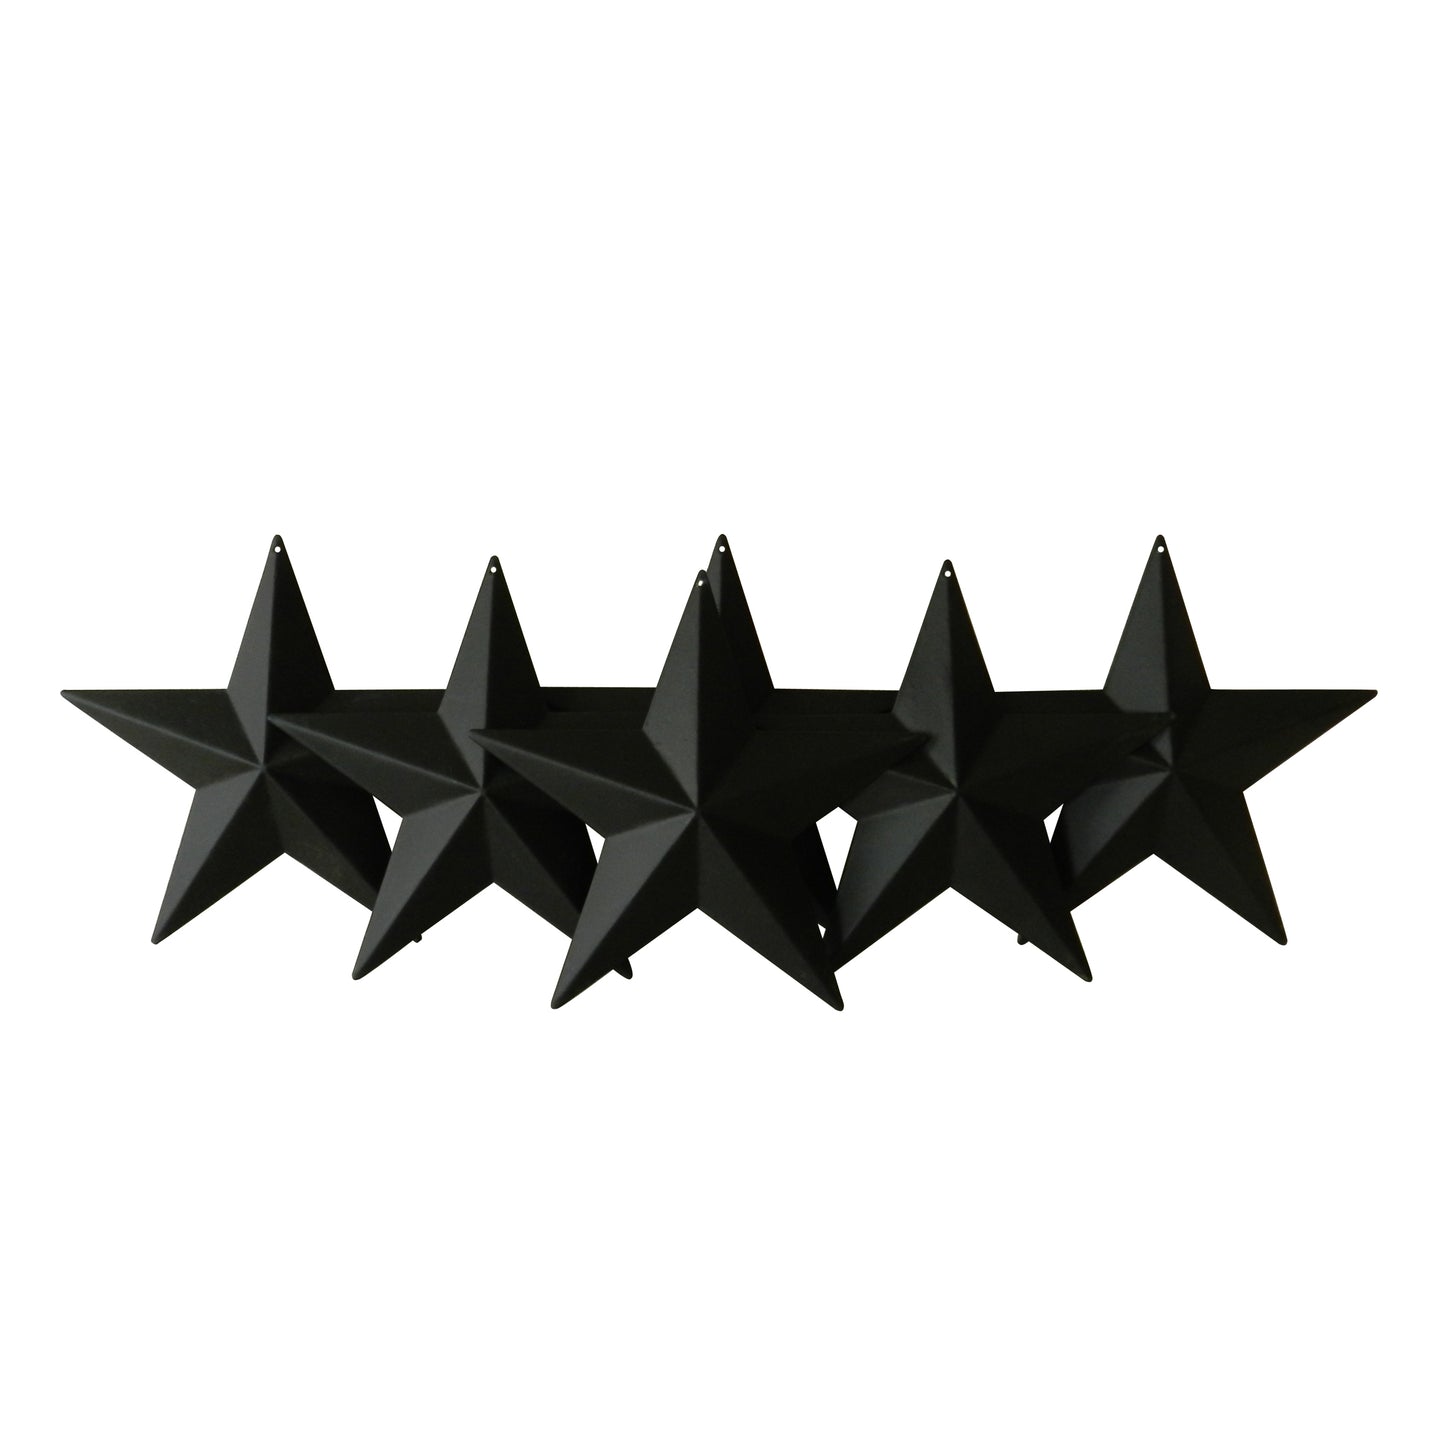 CVHOMEDECO. Country Rustic Antique Vintage Gifts Black Metal Barn Star Wall/Door Decor, 5.5 Inch, Set of 6.